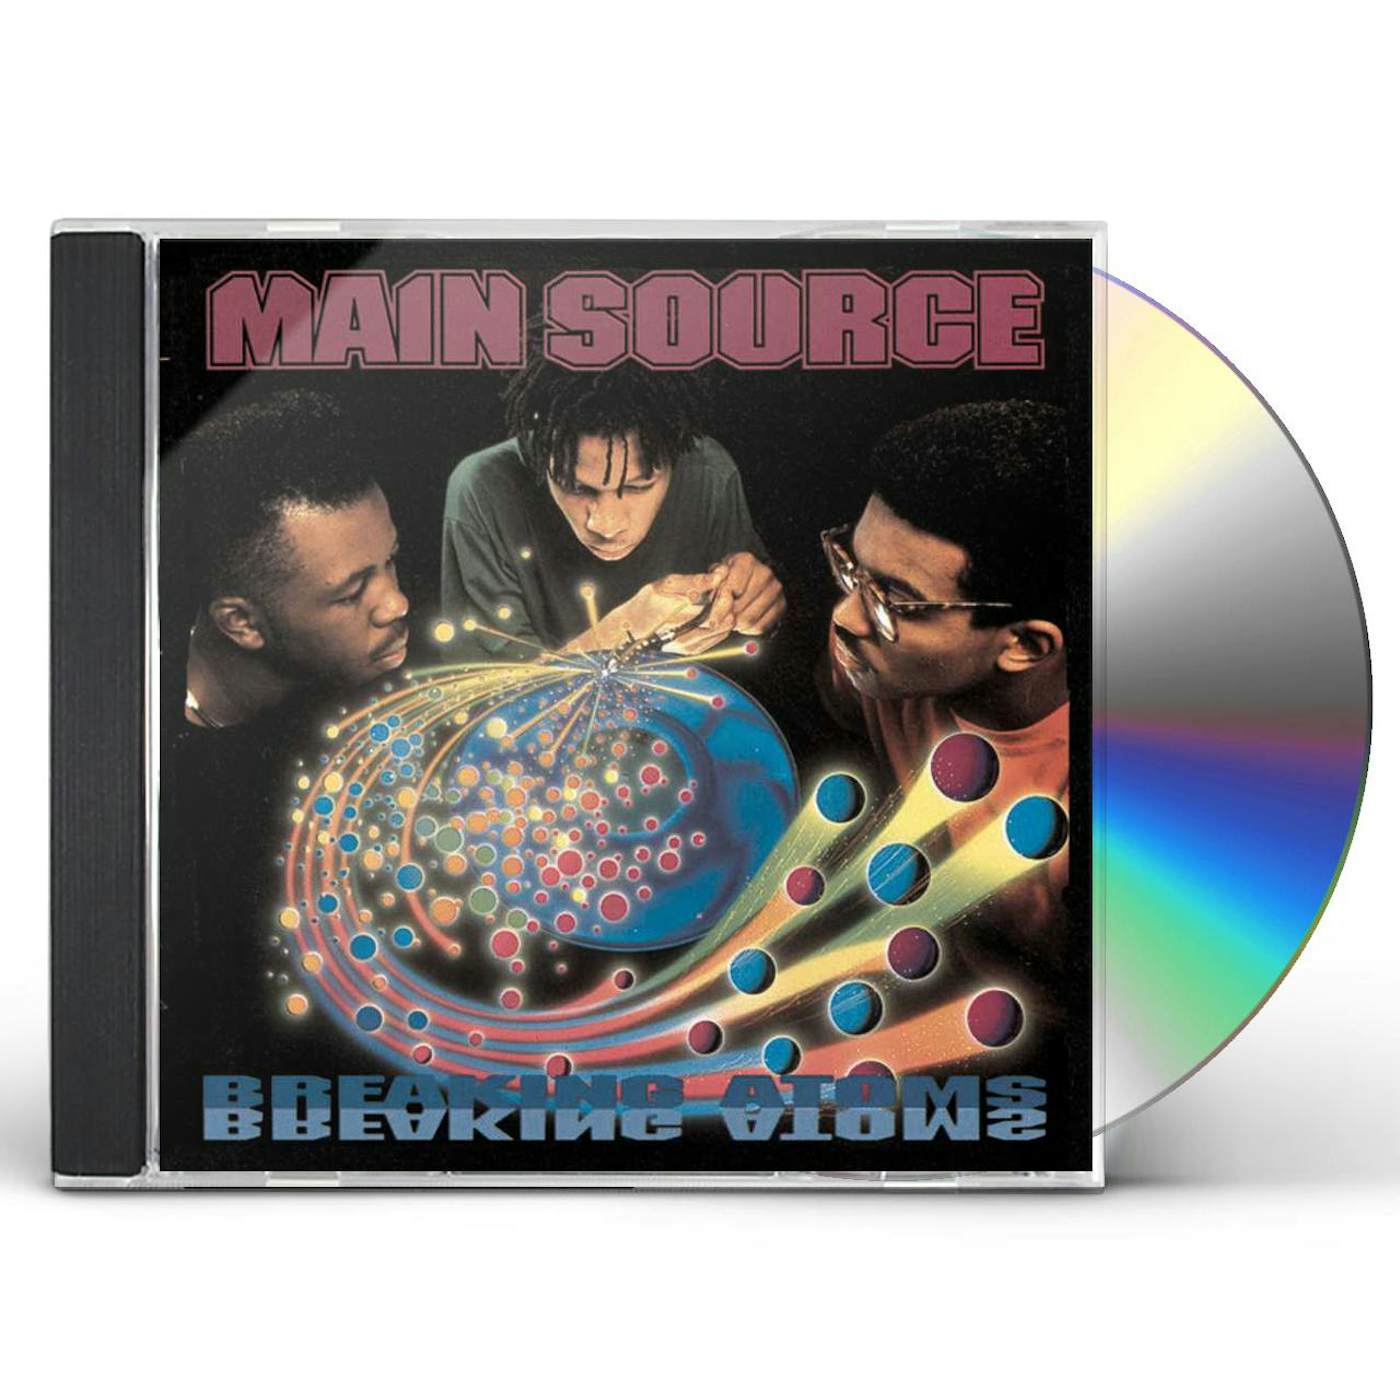 Main Source BREAKING ATOMS - THE REMASTER CD